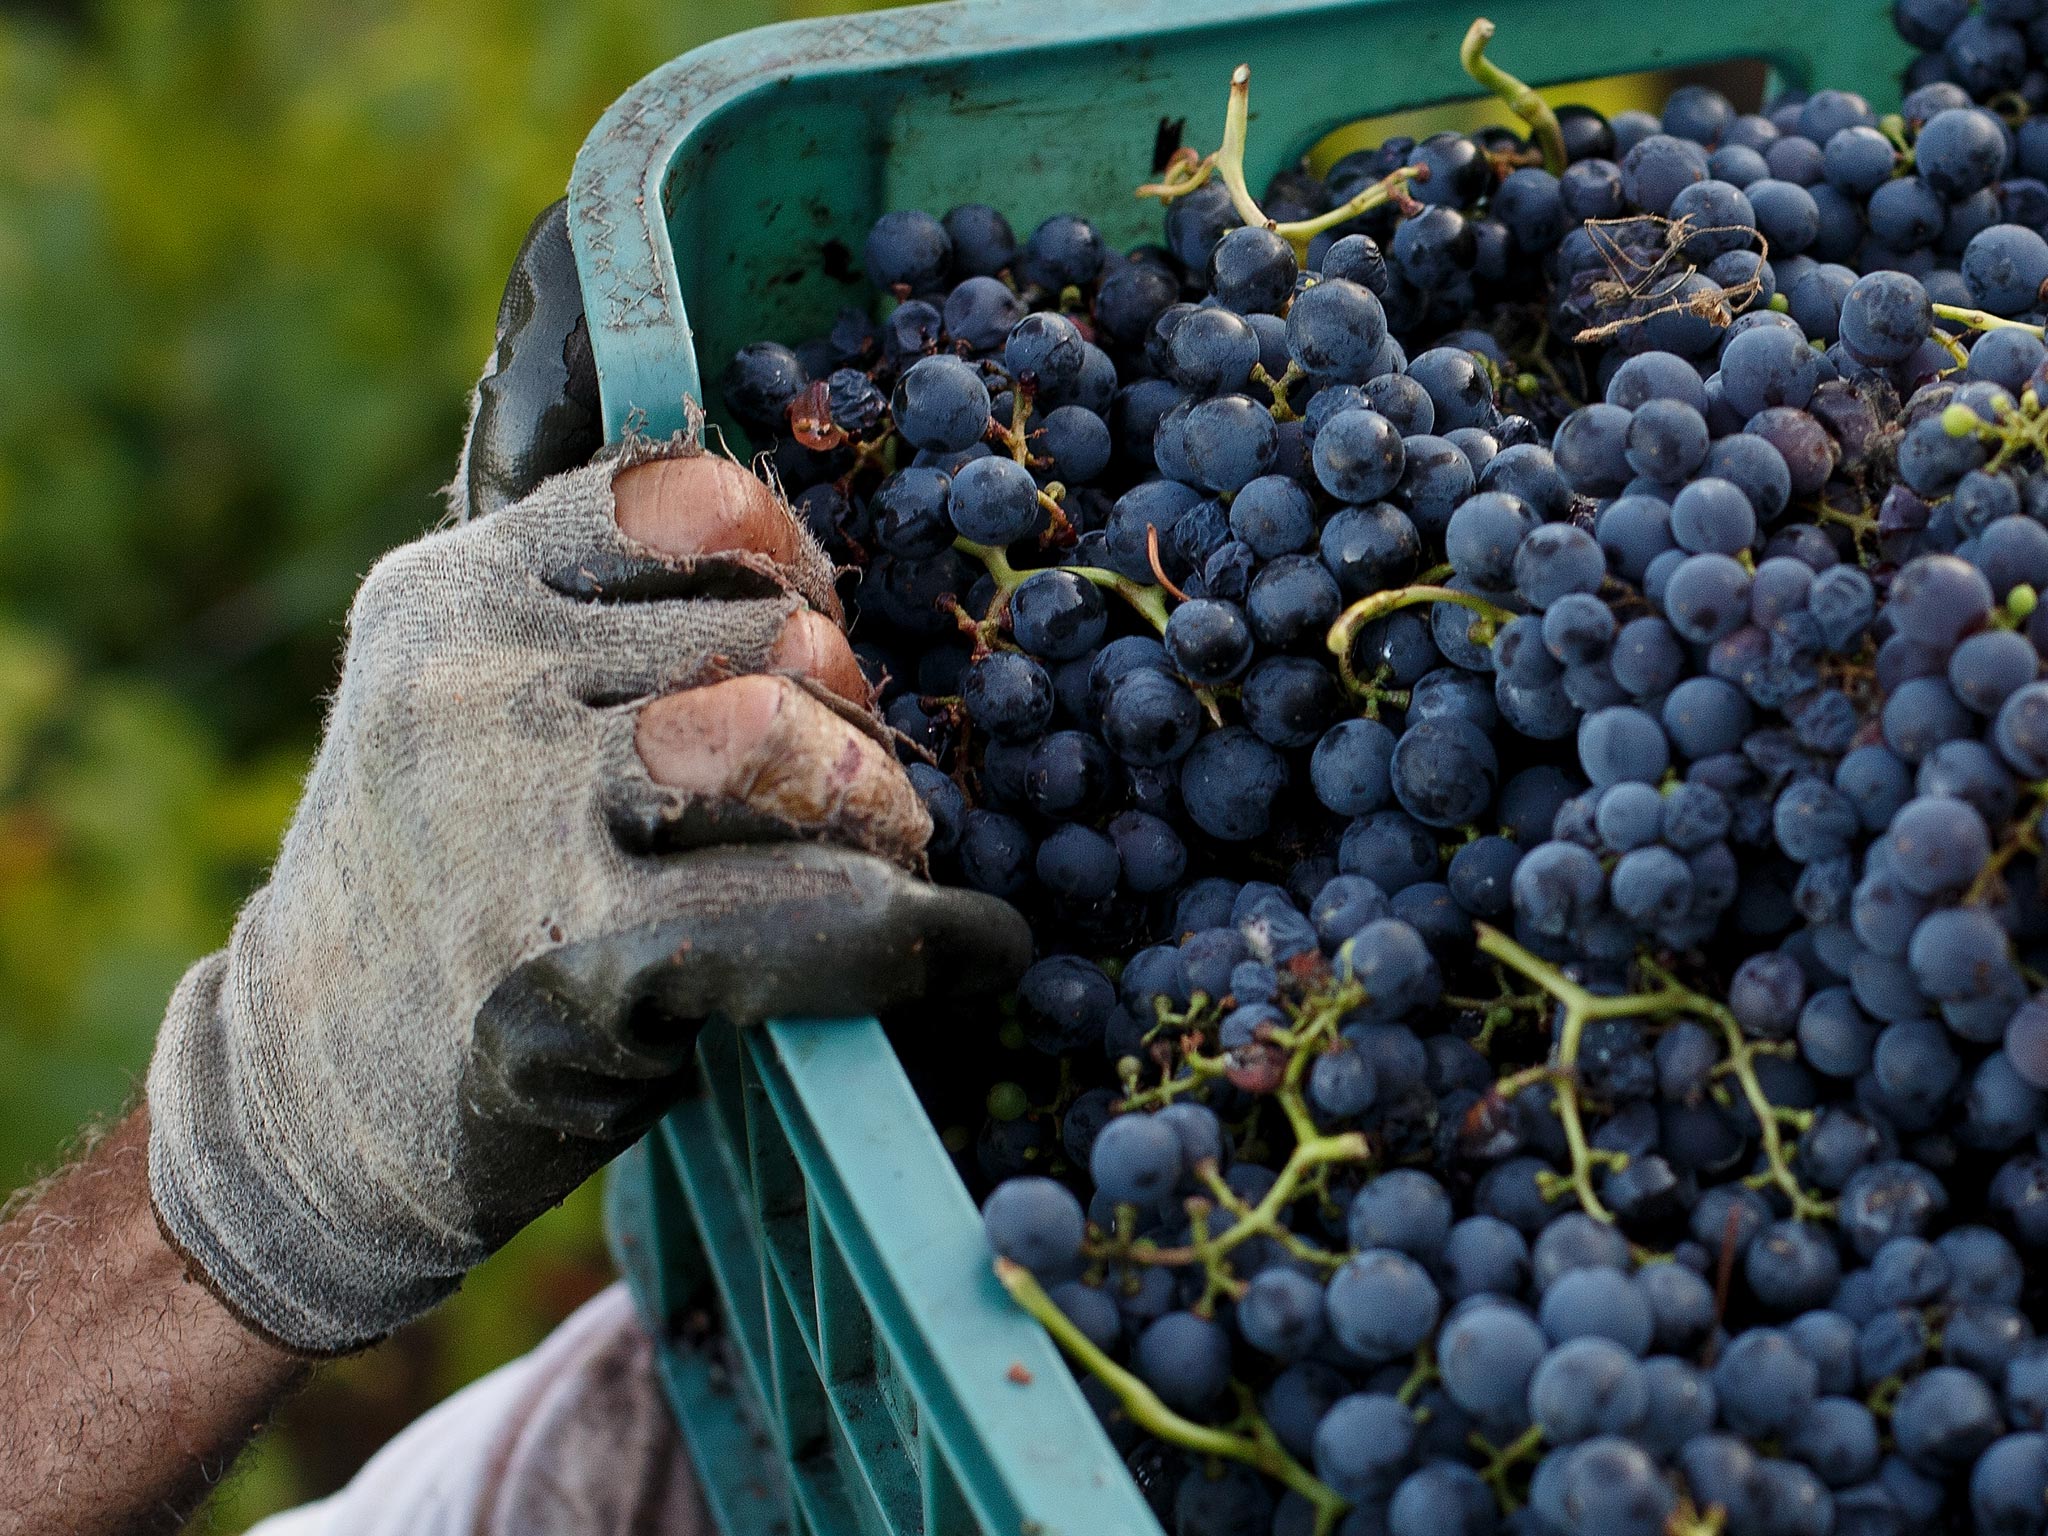 The first wine grapes are set to be harvested from a sloping vineyard in Upper Largo on the south coast of Fife